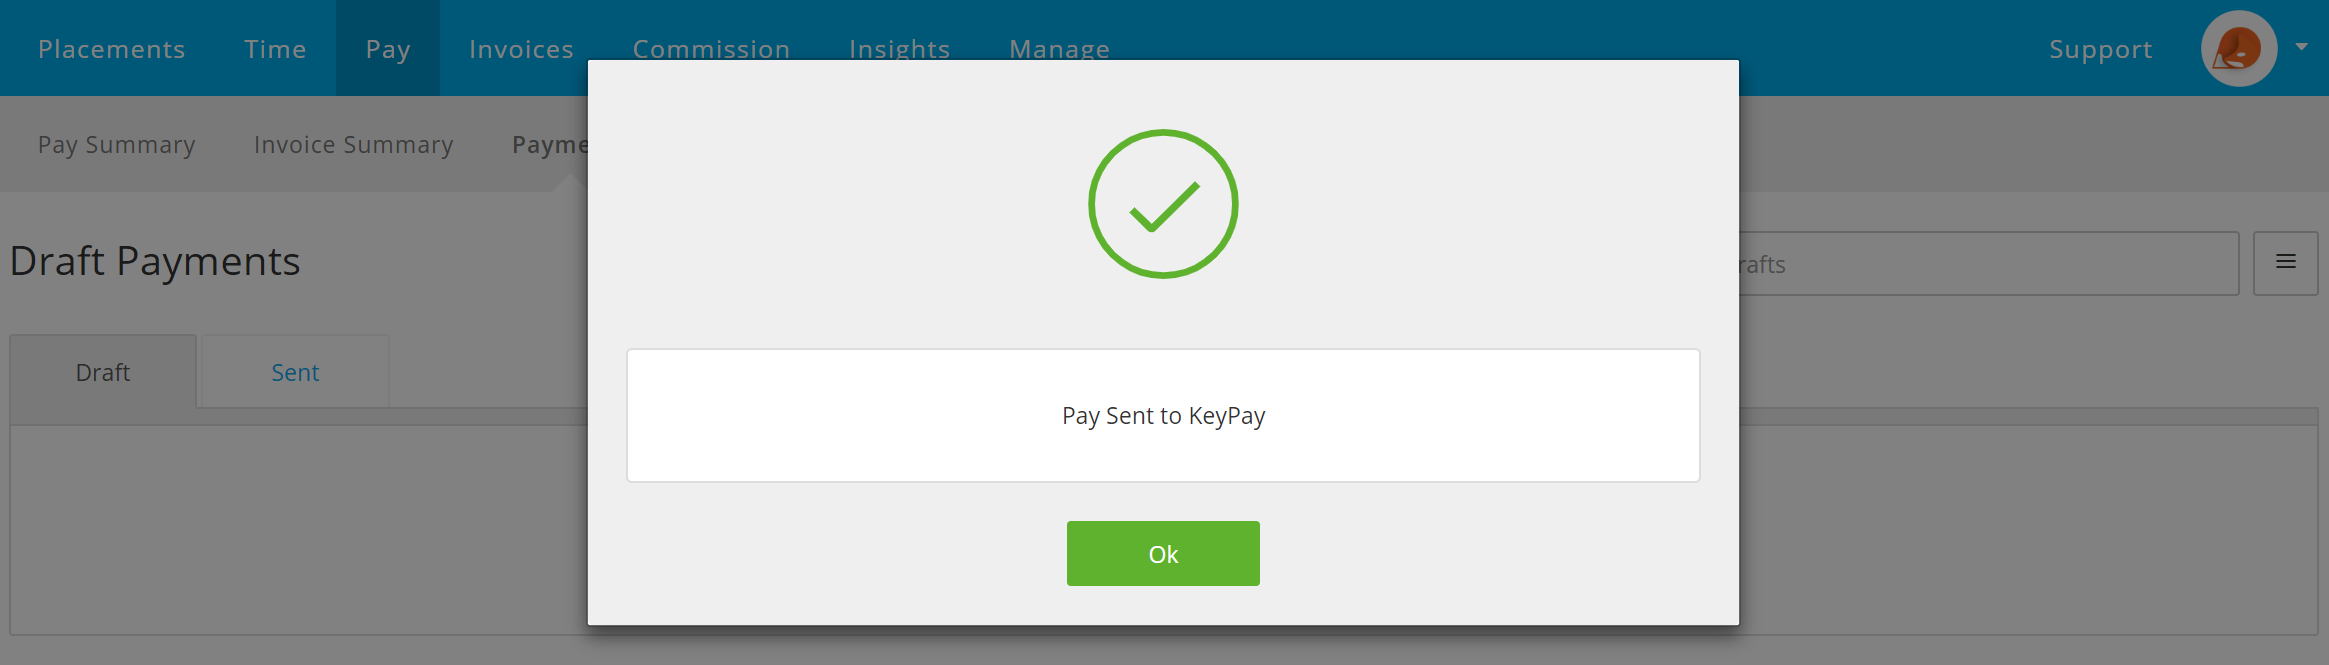 Pay_Sent_to_KeyPay.png